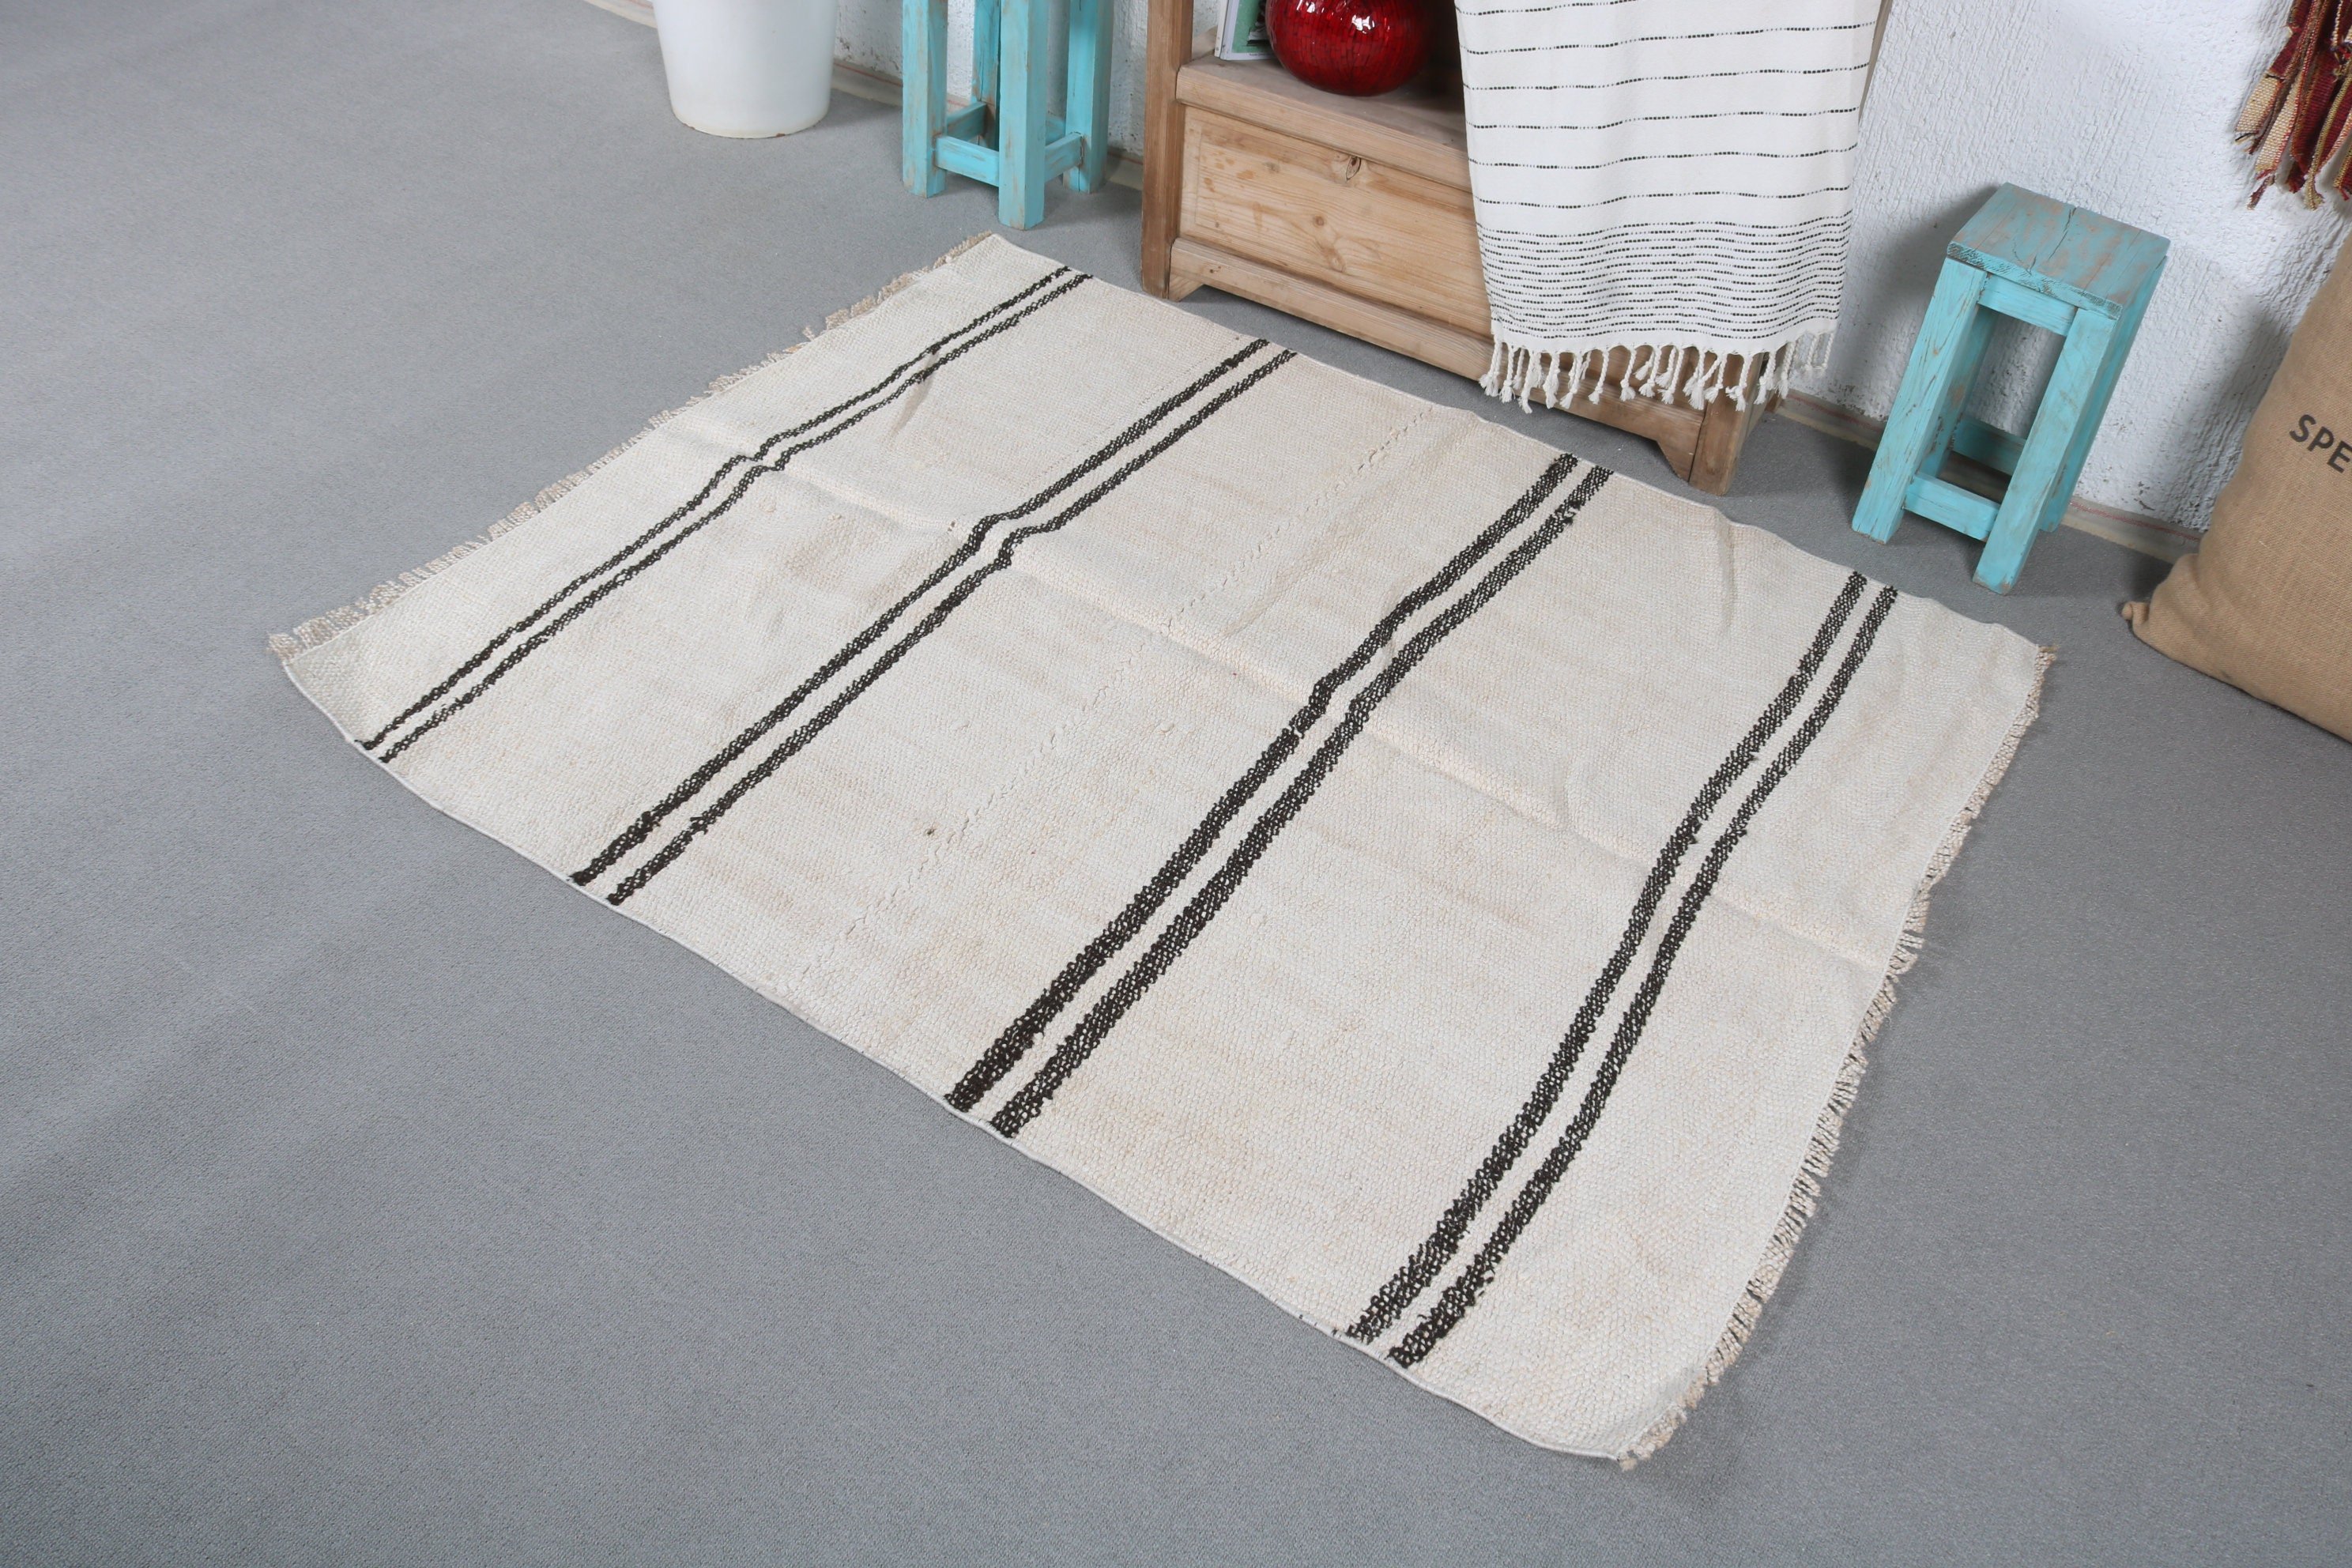 Vintage Rugs, Rugs for Nursery, Home Decor Rug, Turkish Rugs, 3.8x4.7 ft Accent Rugs, White Bedroom Rug, Kitchen Rugs, Wool Rug, Entry Rug